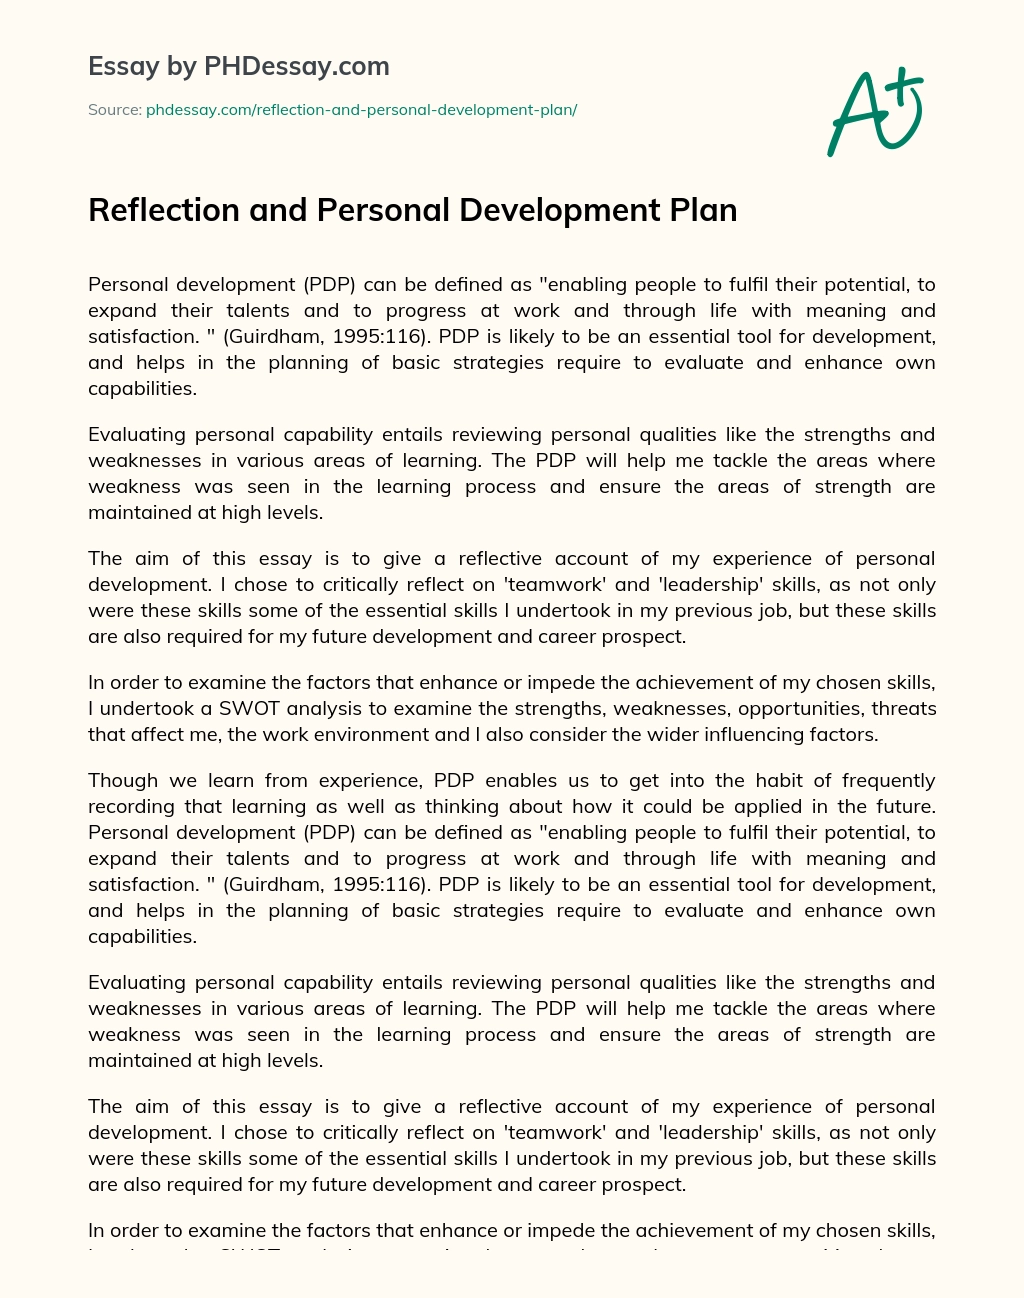 Reflection and Personal Development Plan